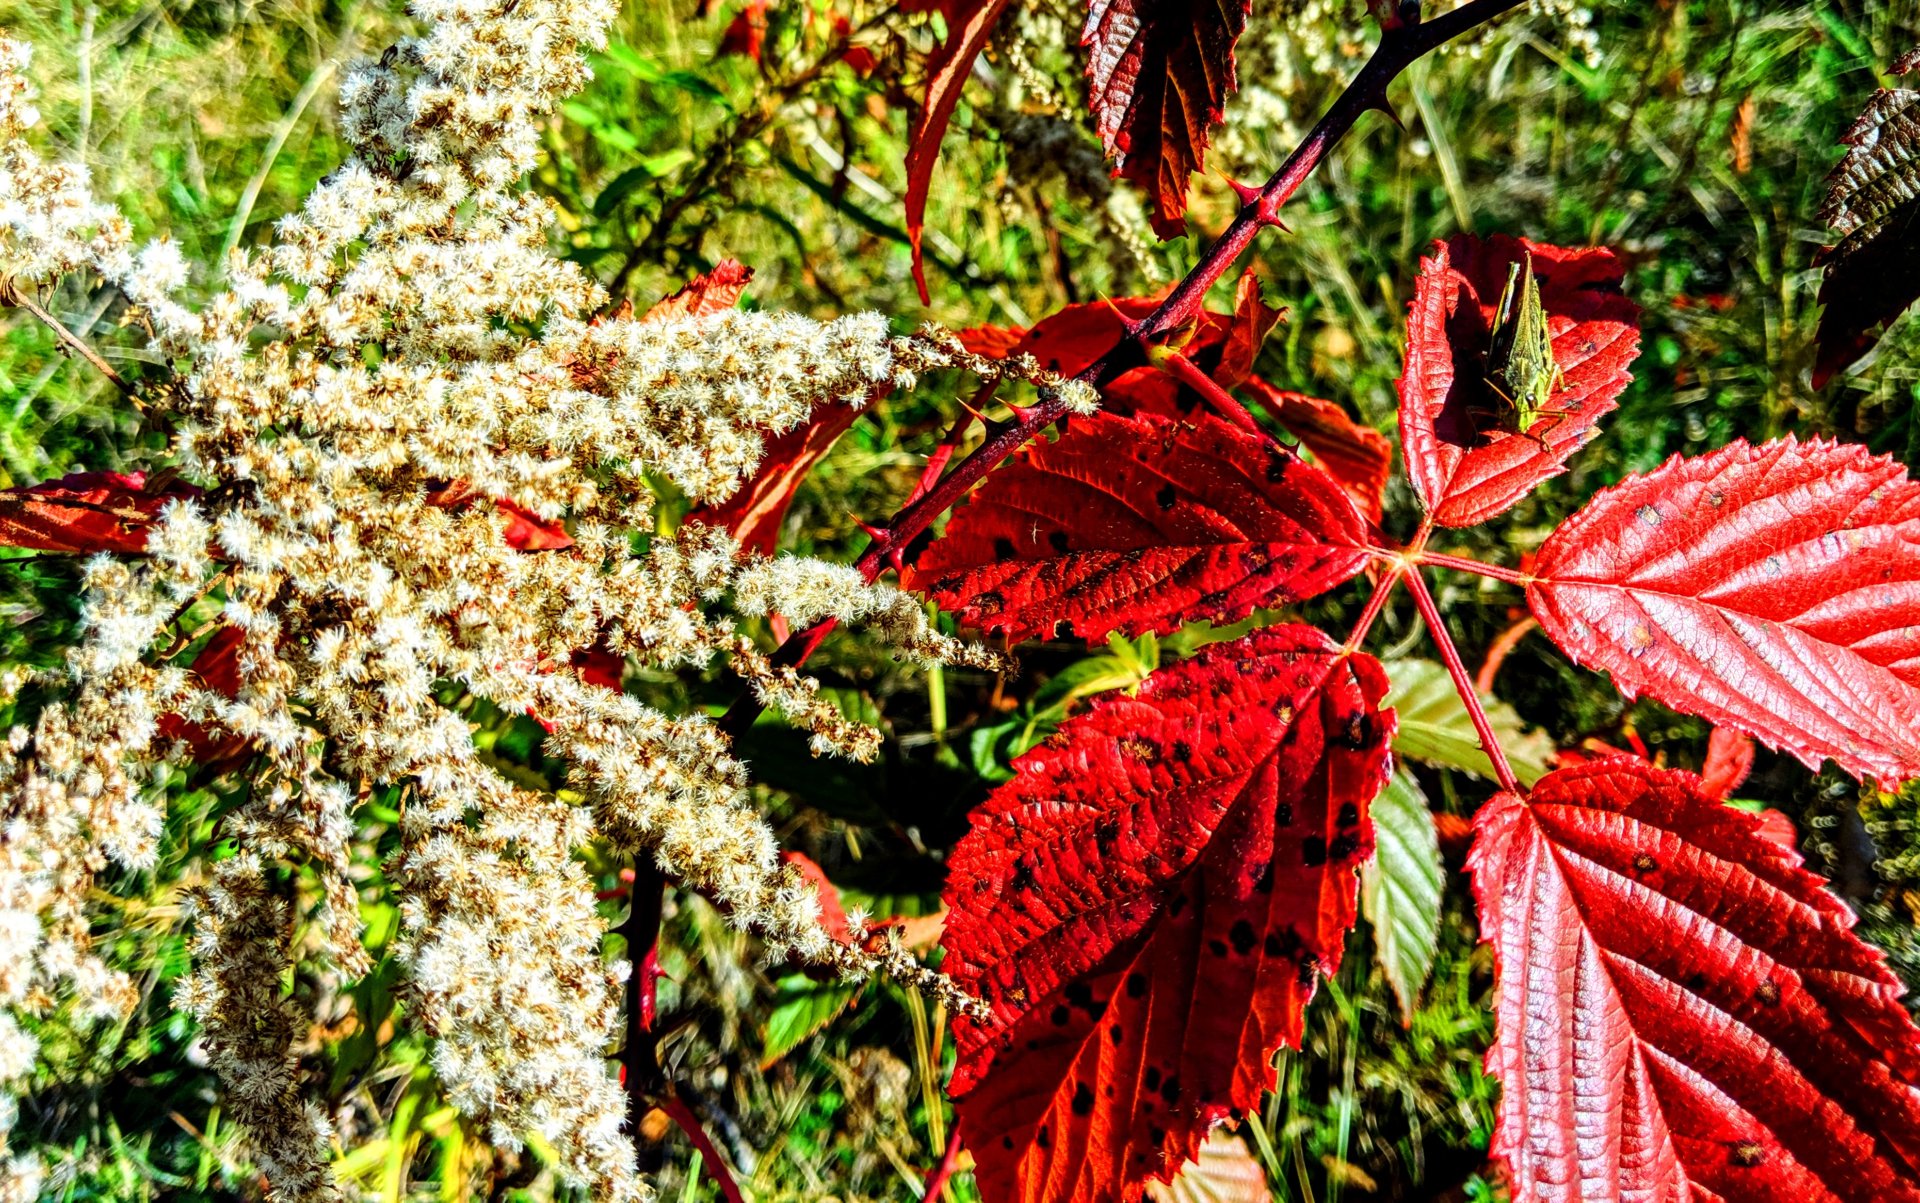 oct, 20 2019, perry Maine, red leaf with grasshopper and white seed flower